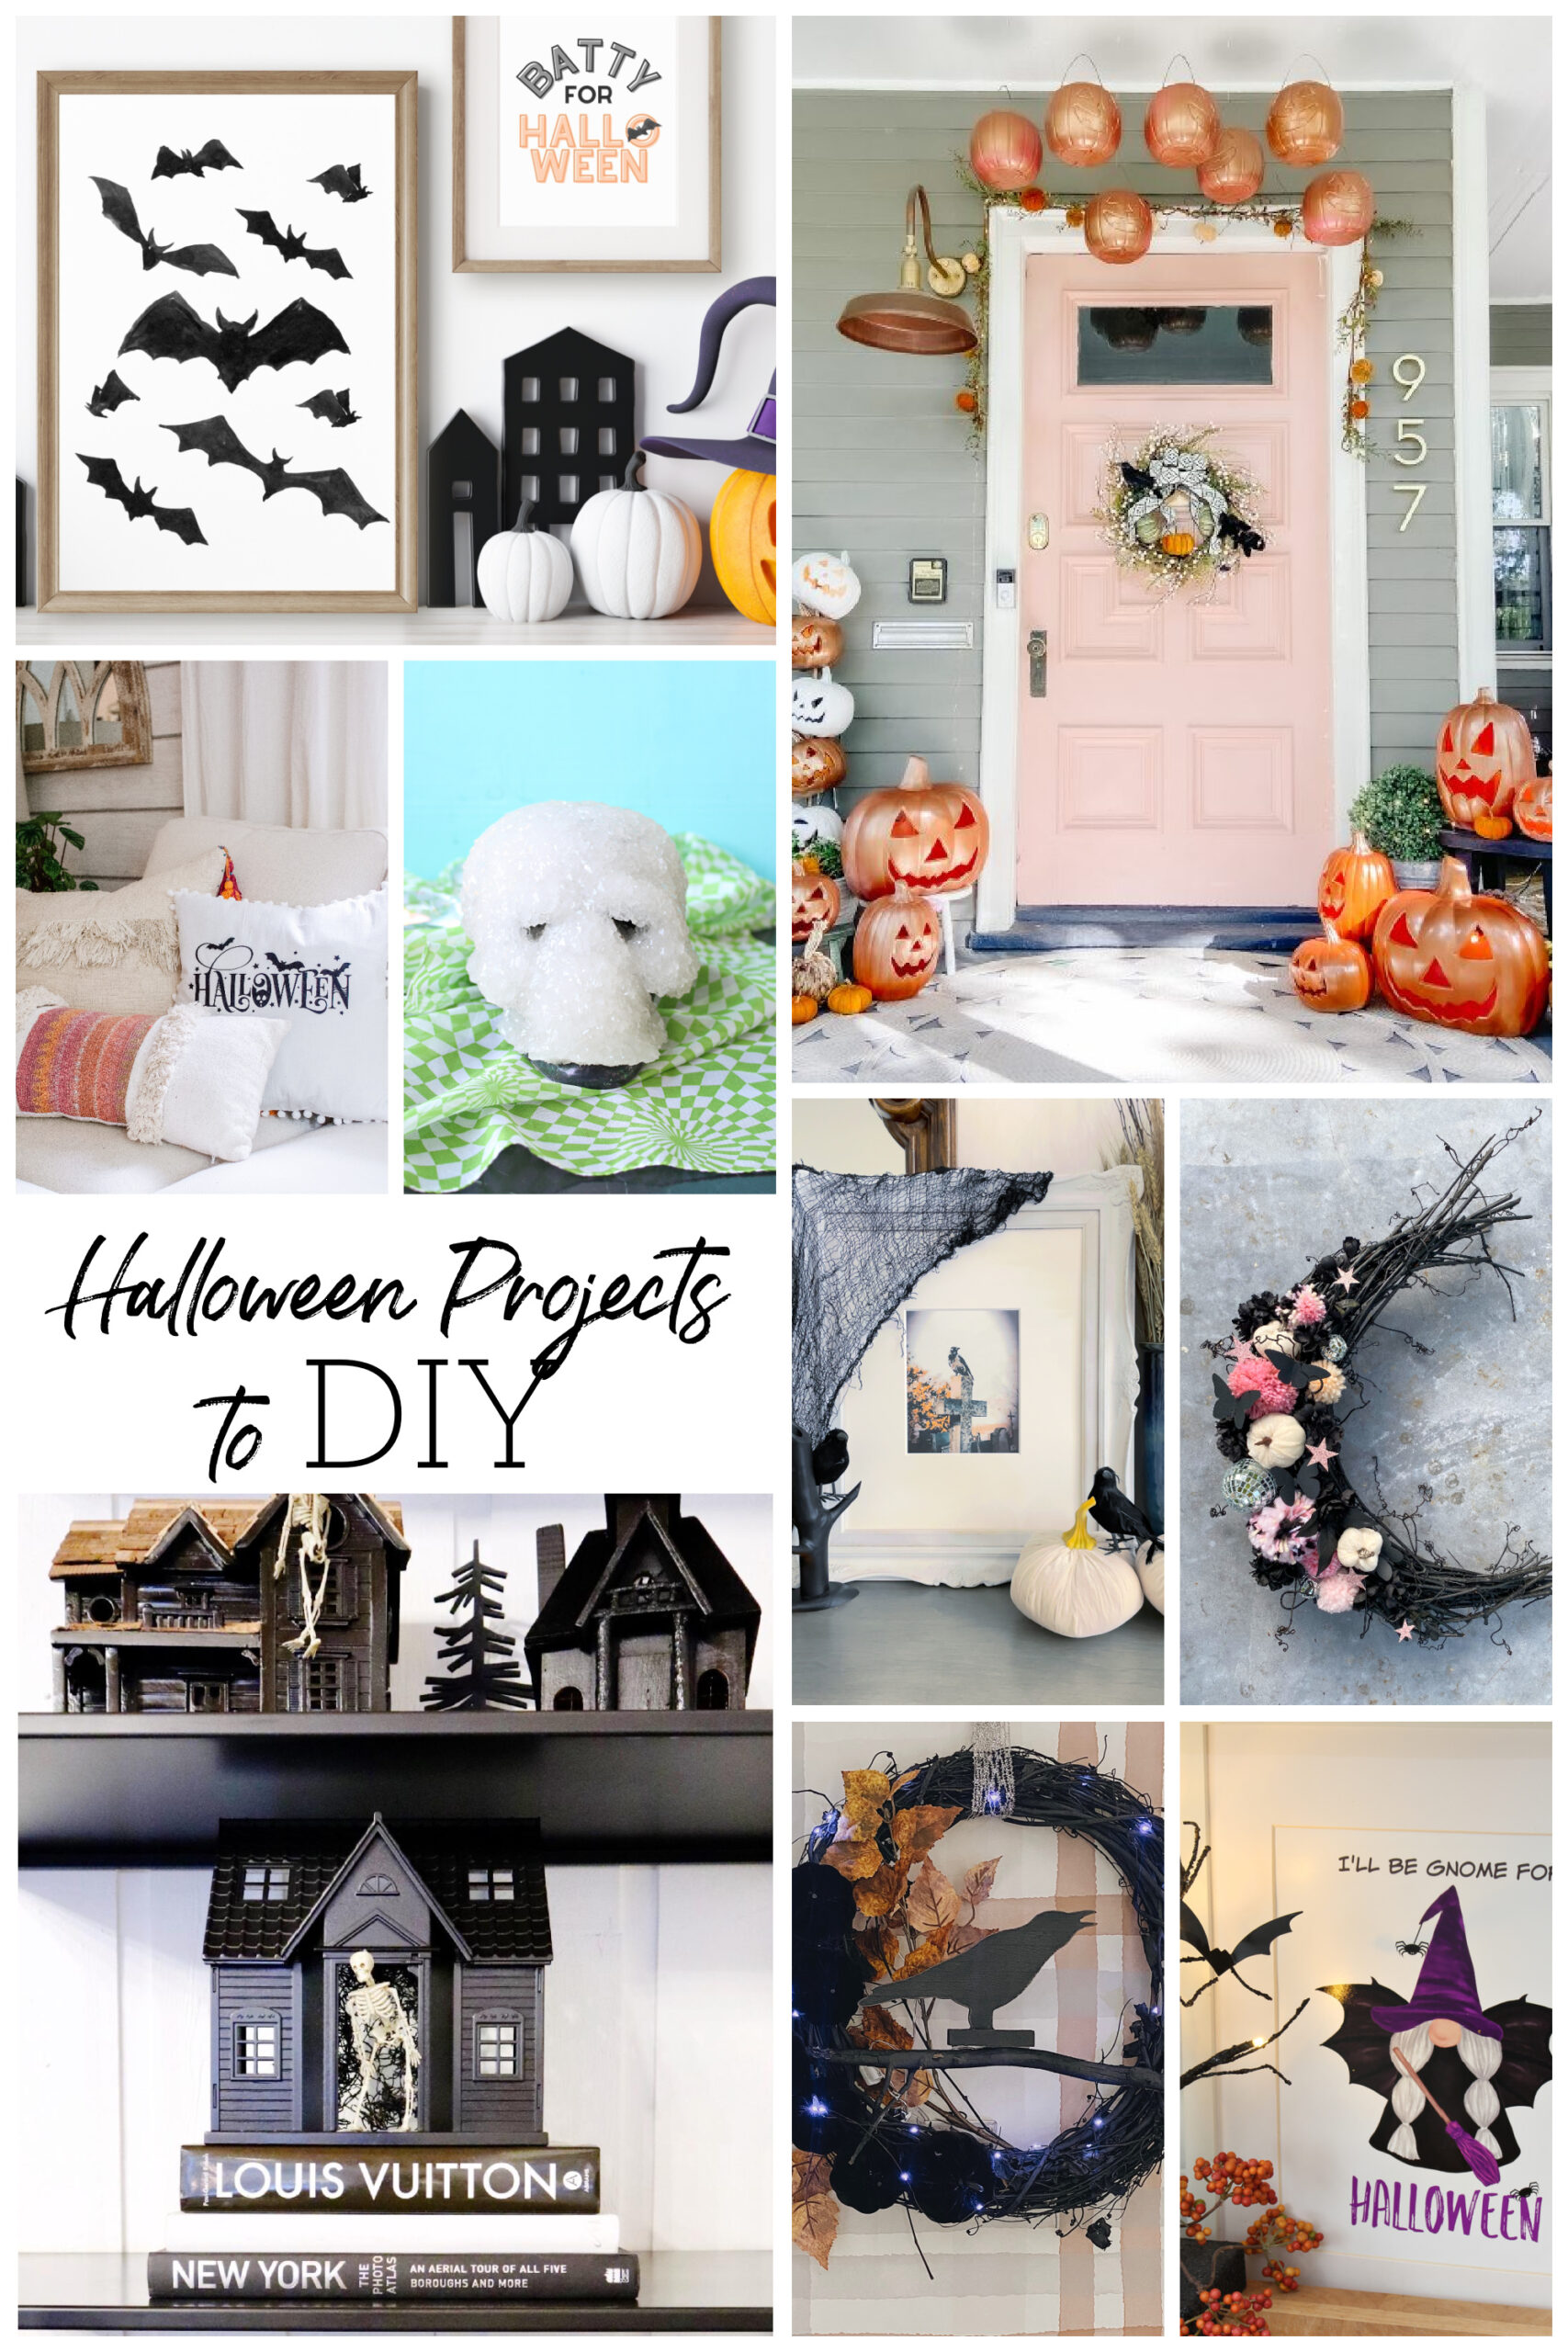 a collage image with several Halloween DIY projects and decorating ideas